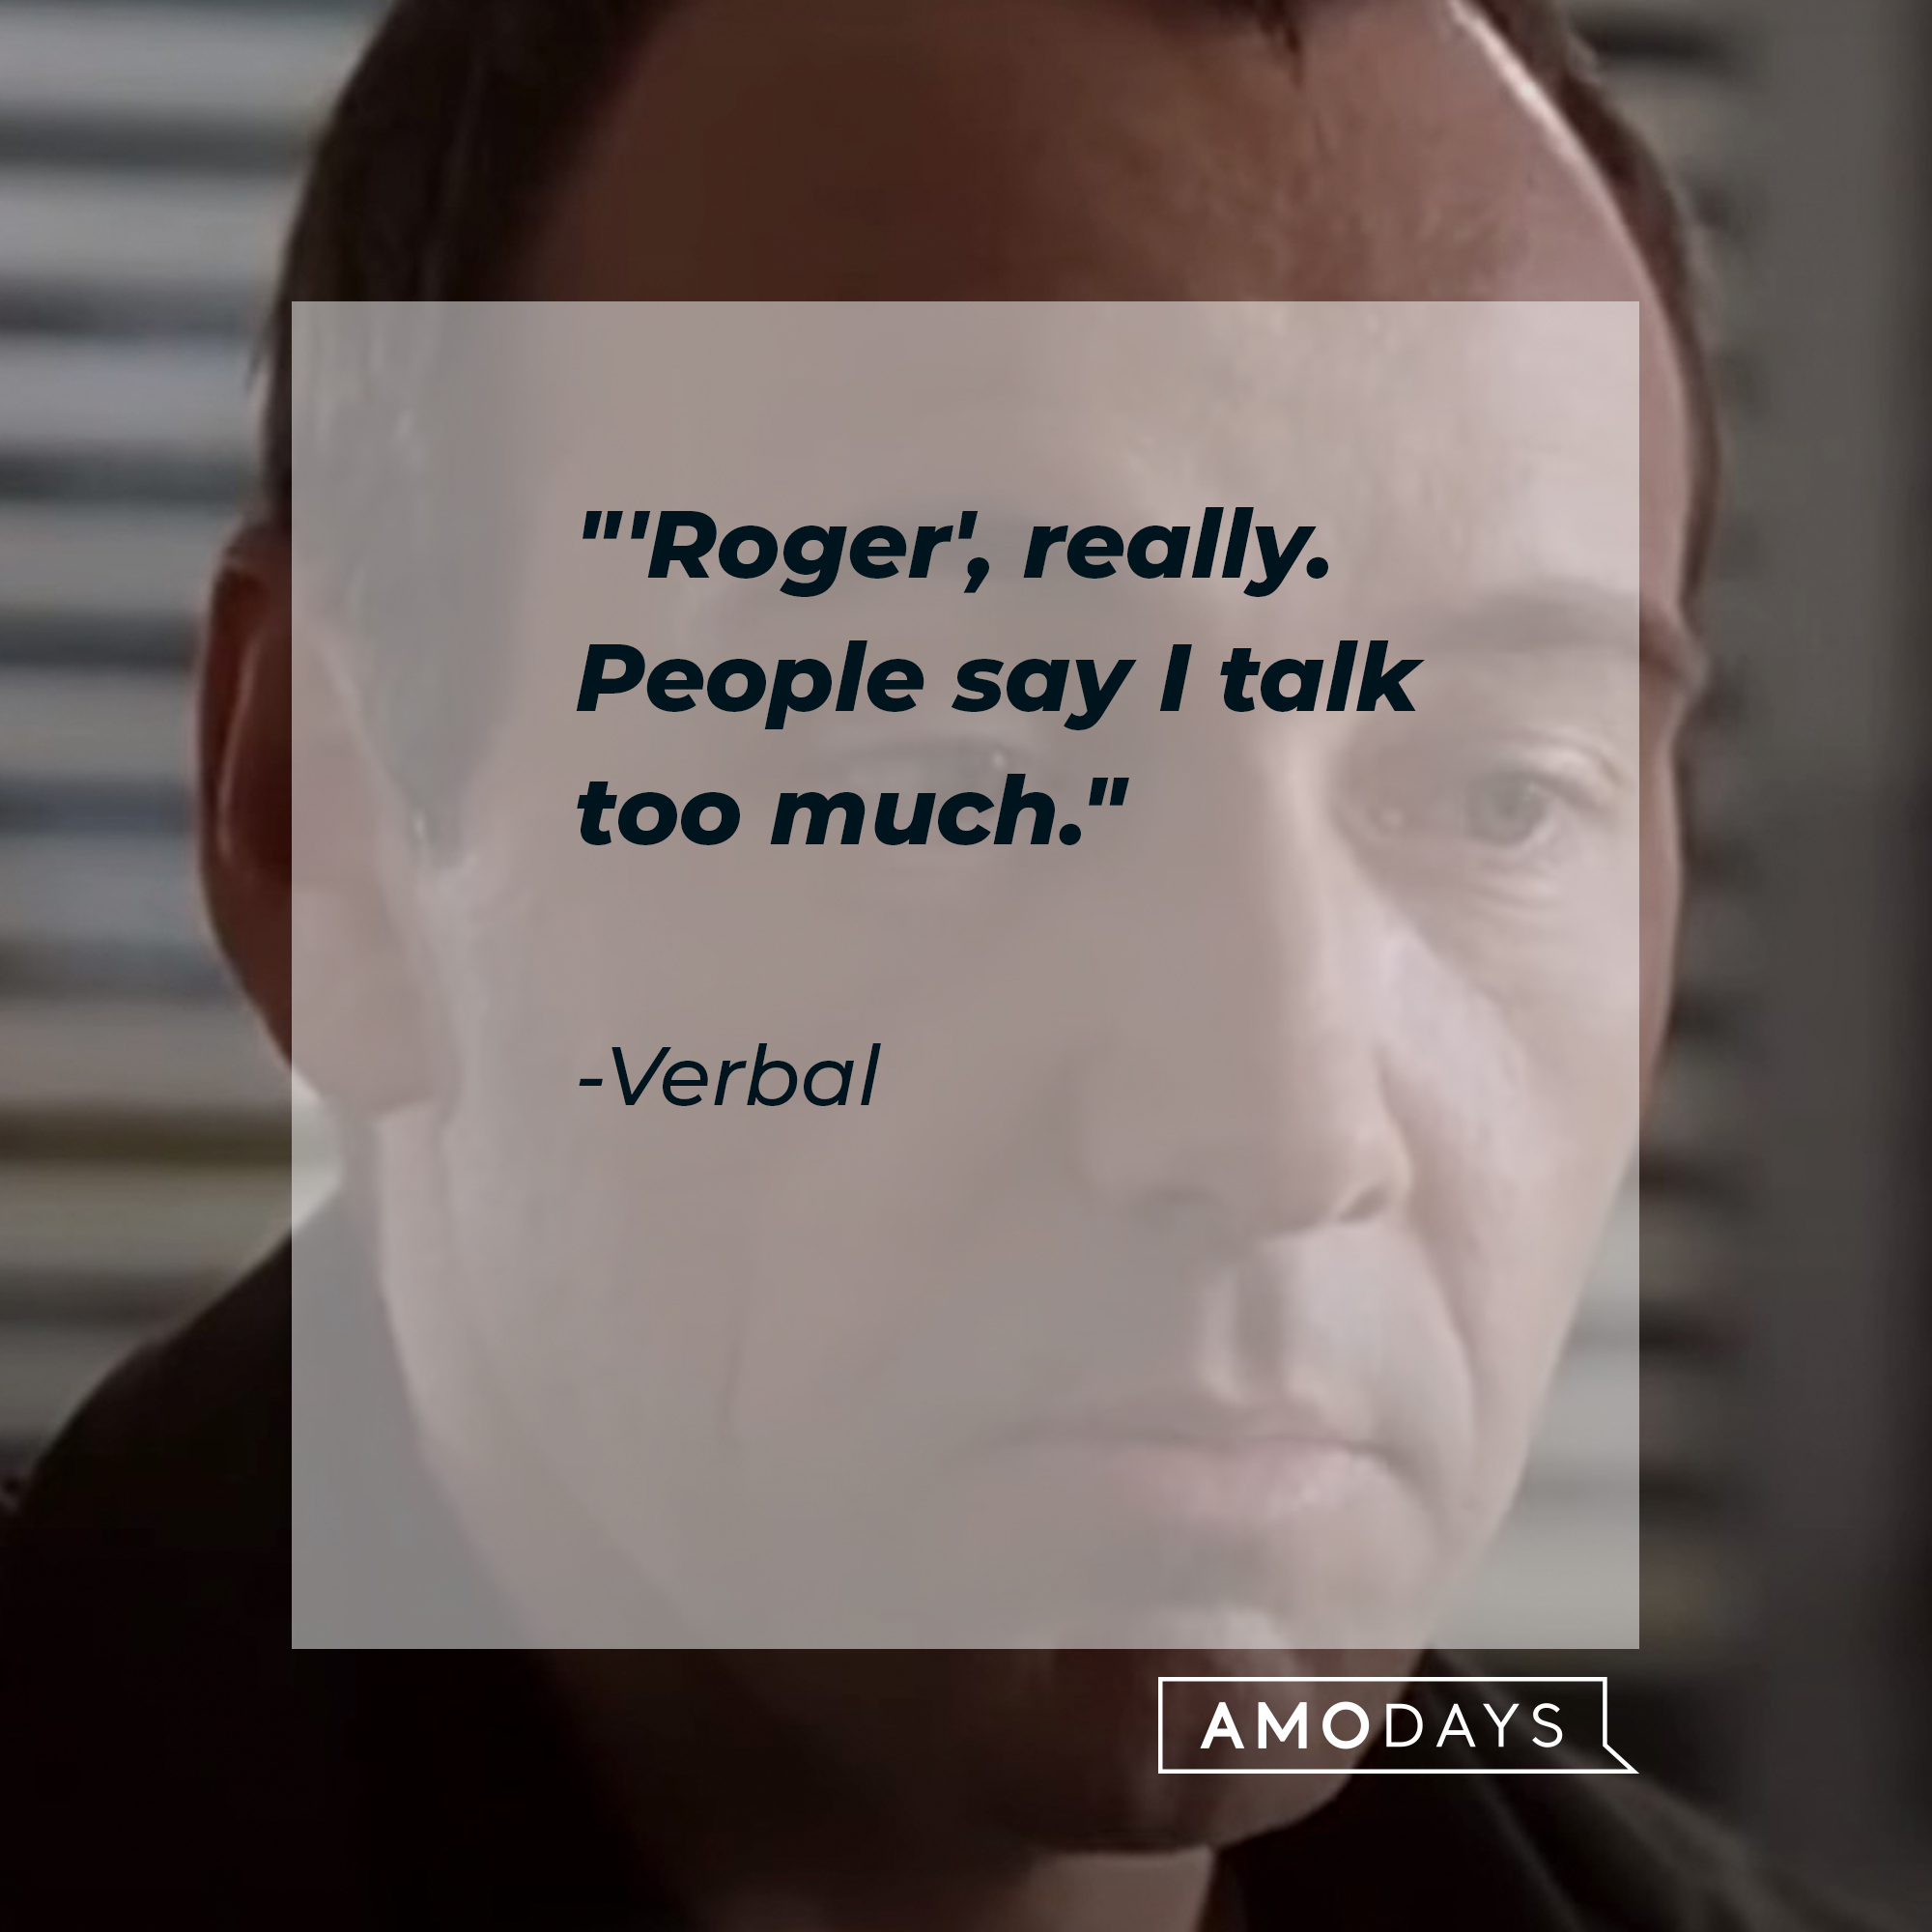 Verbal's quote: "'Roger', really. People say I talk too much." | Source: facebook.com/usualsuspectsmovie